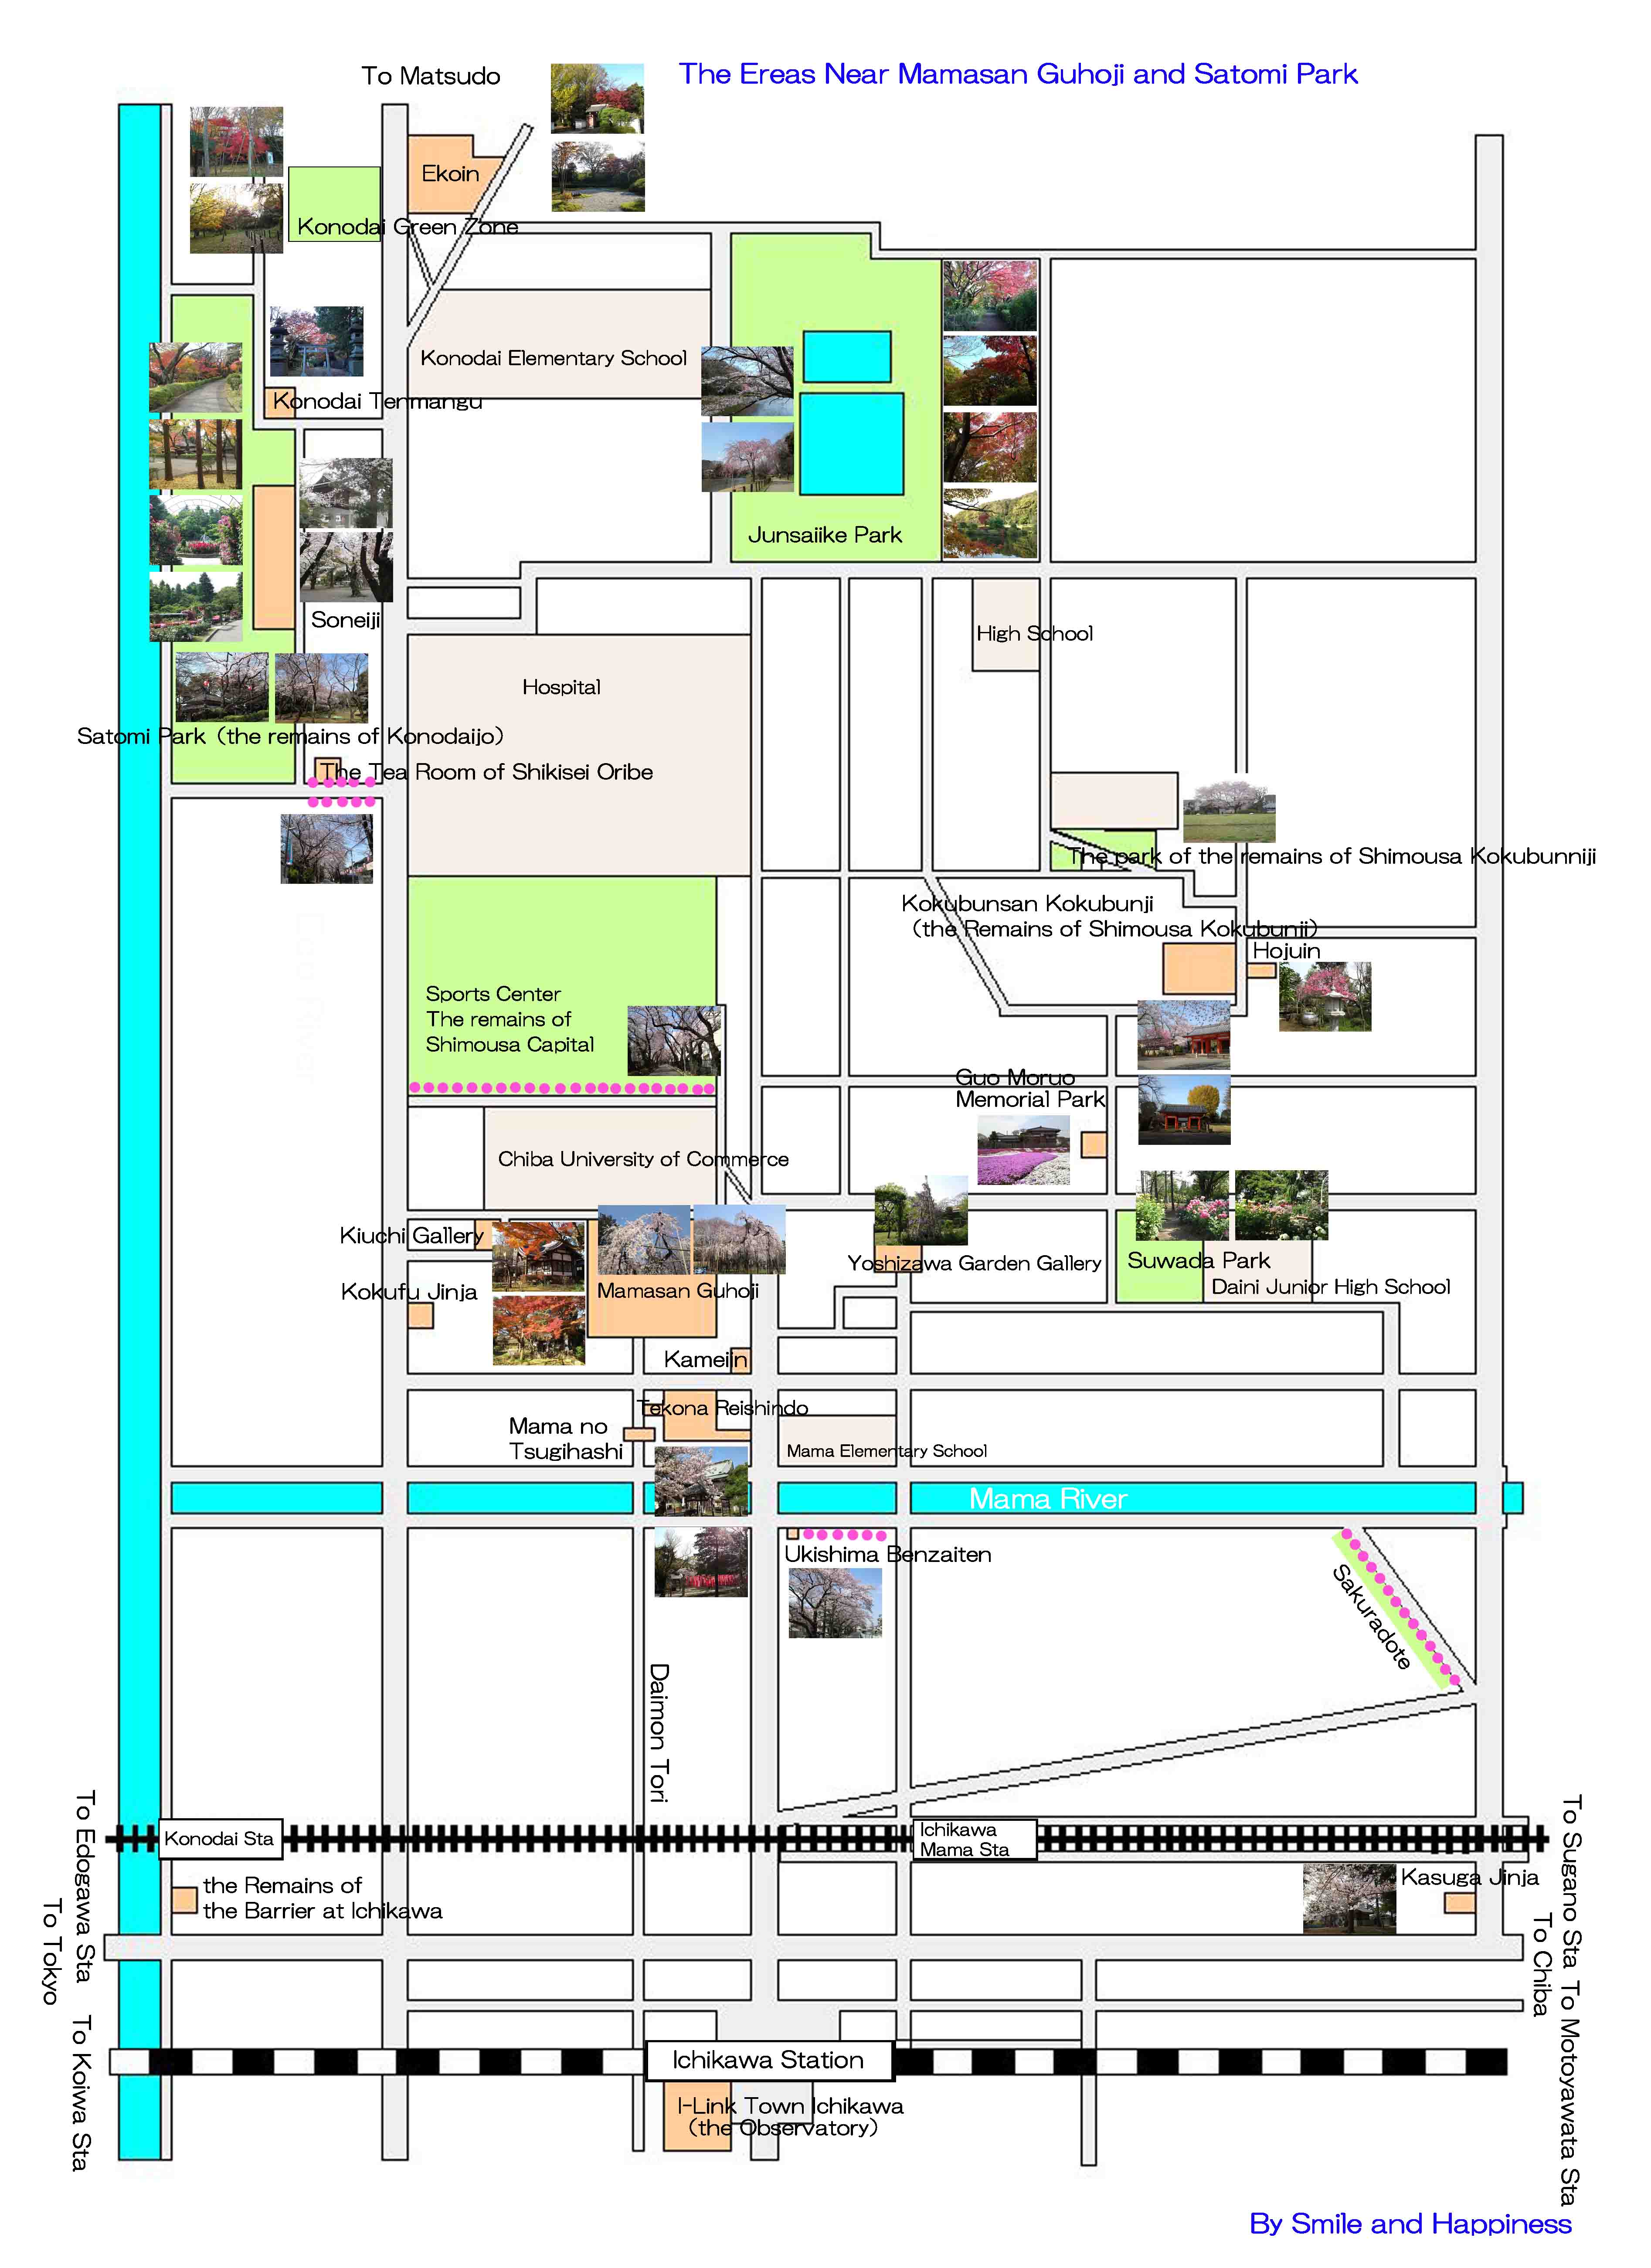 the map to Kiuchi Gallery